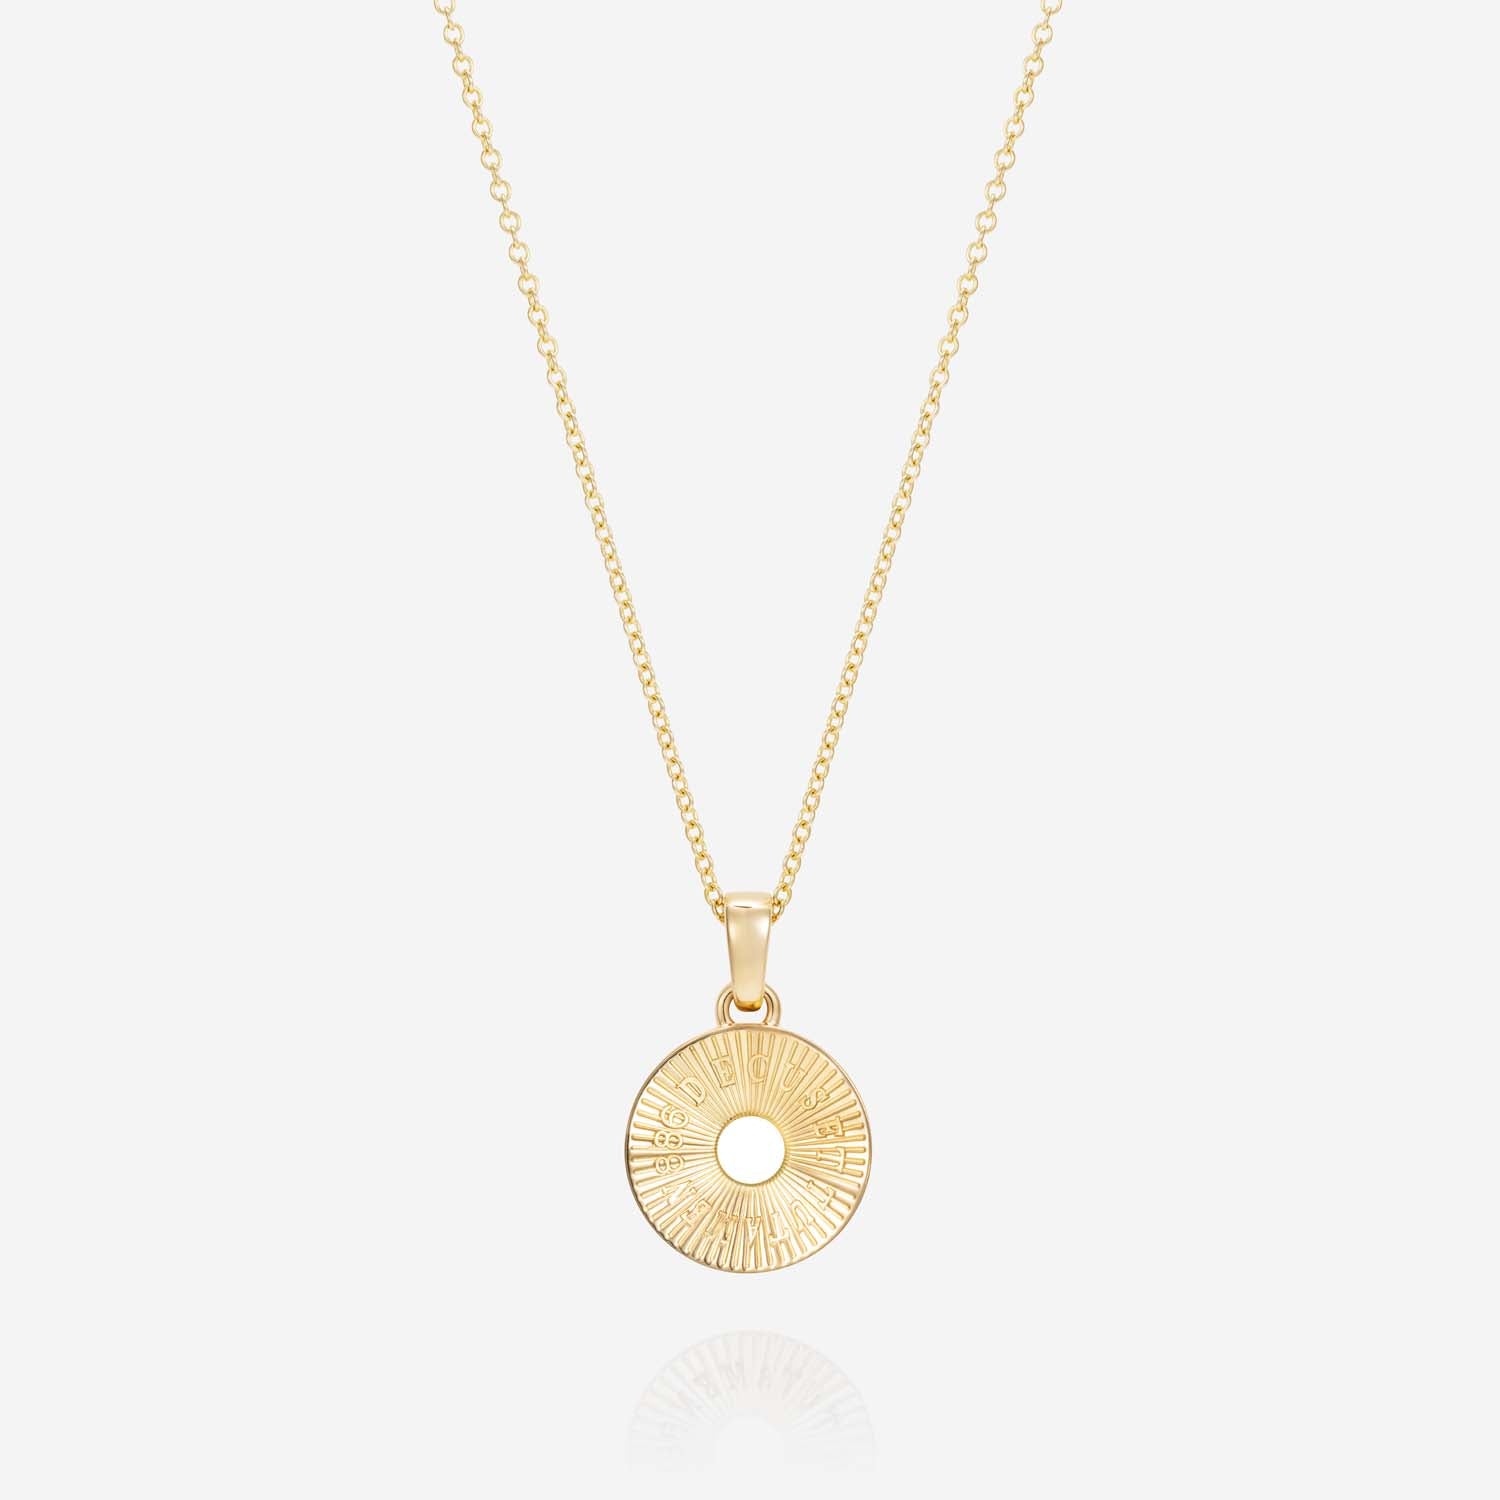 886 Royal Mint Necklaces Tutamen Round Pendant with Chain 18ct Yellow Gold